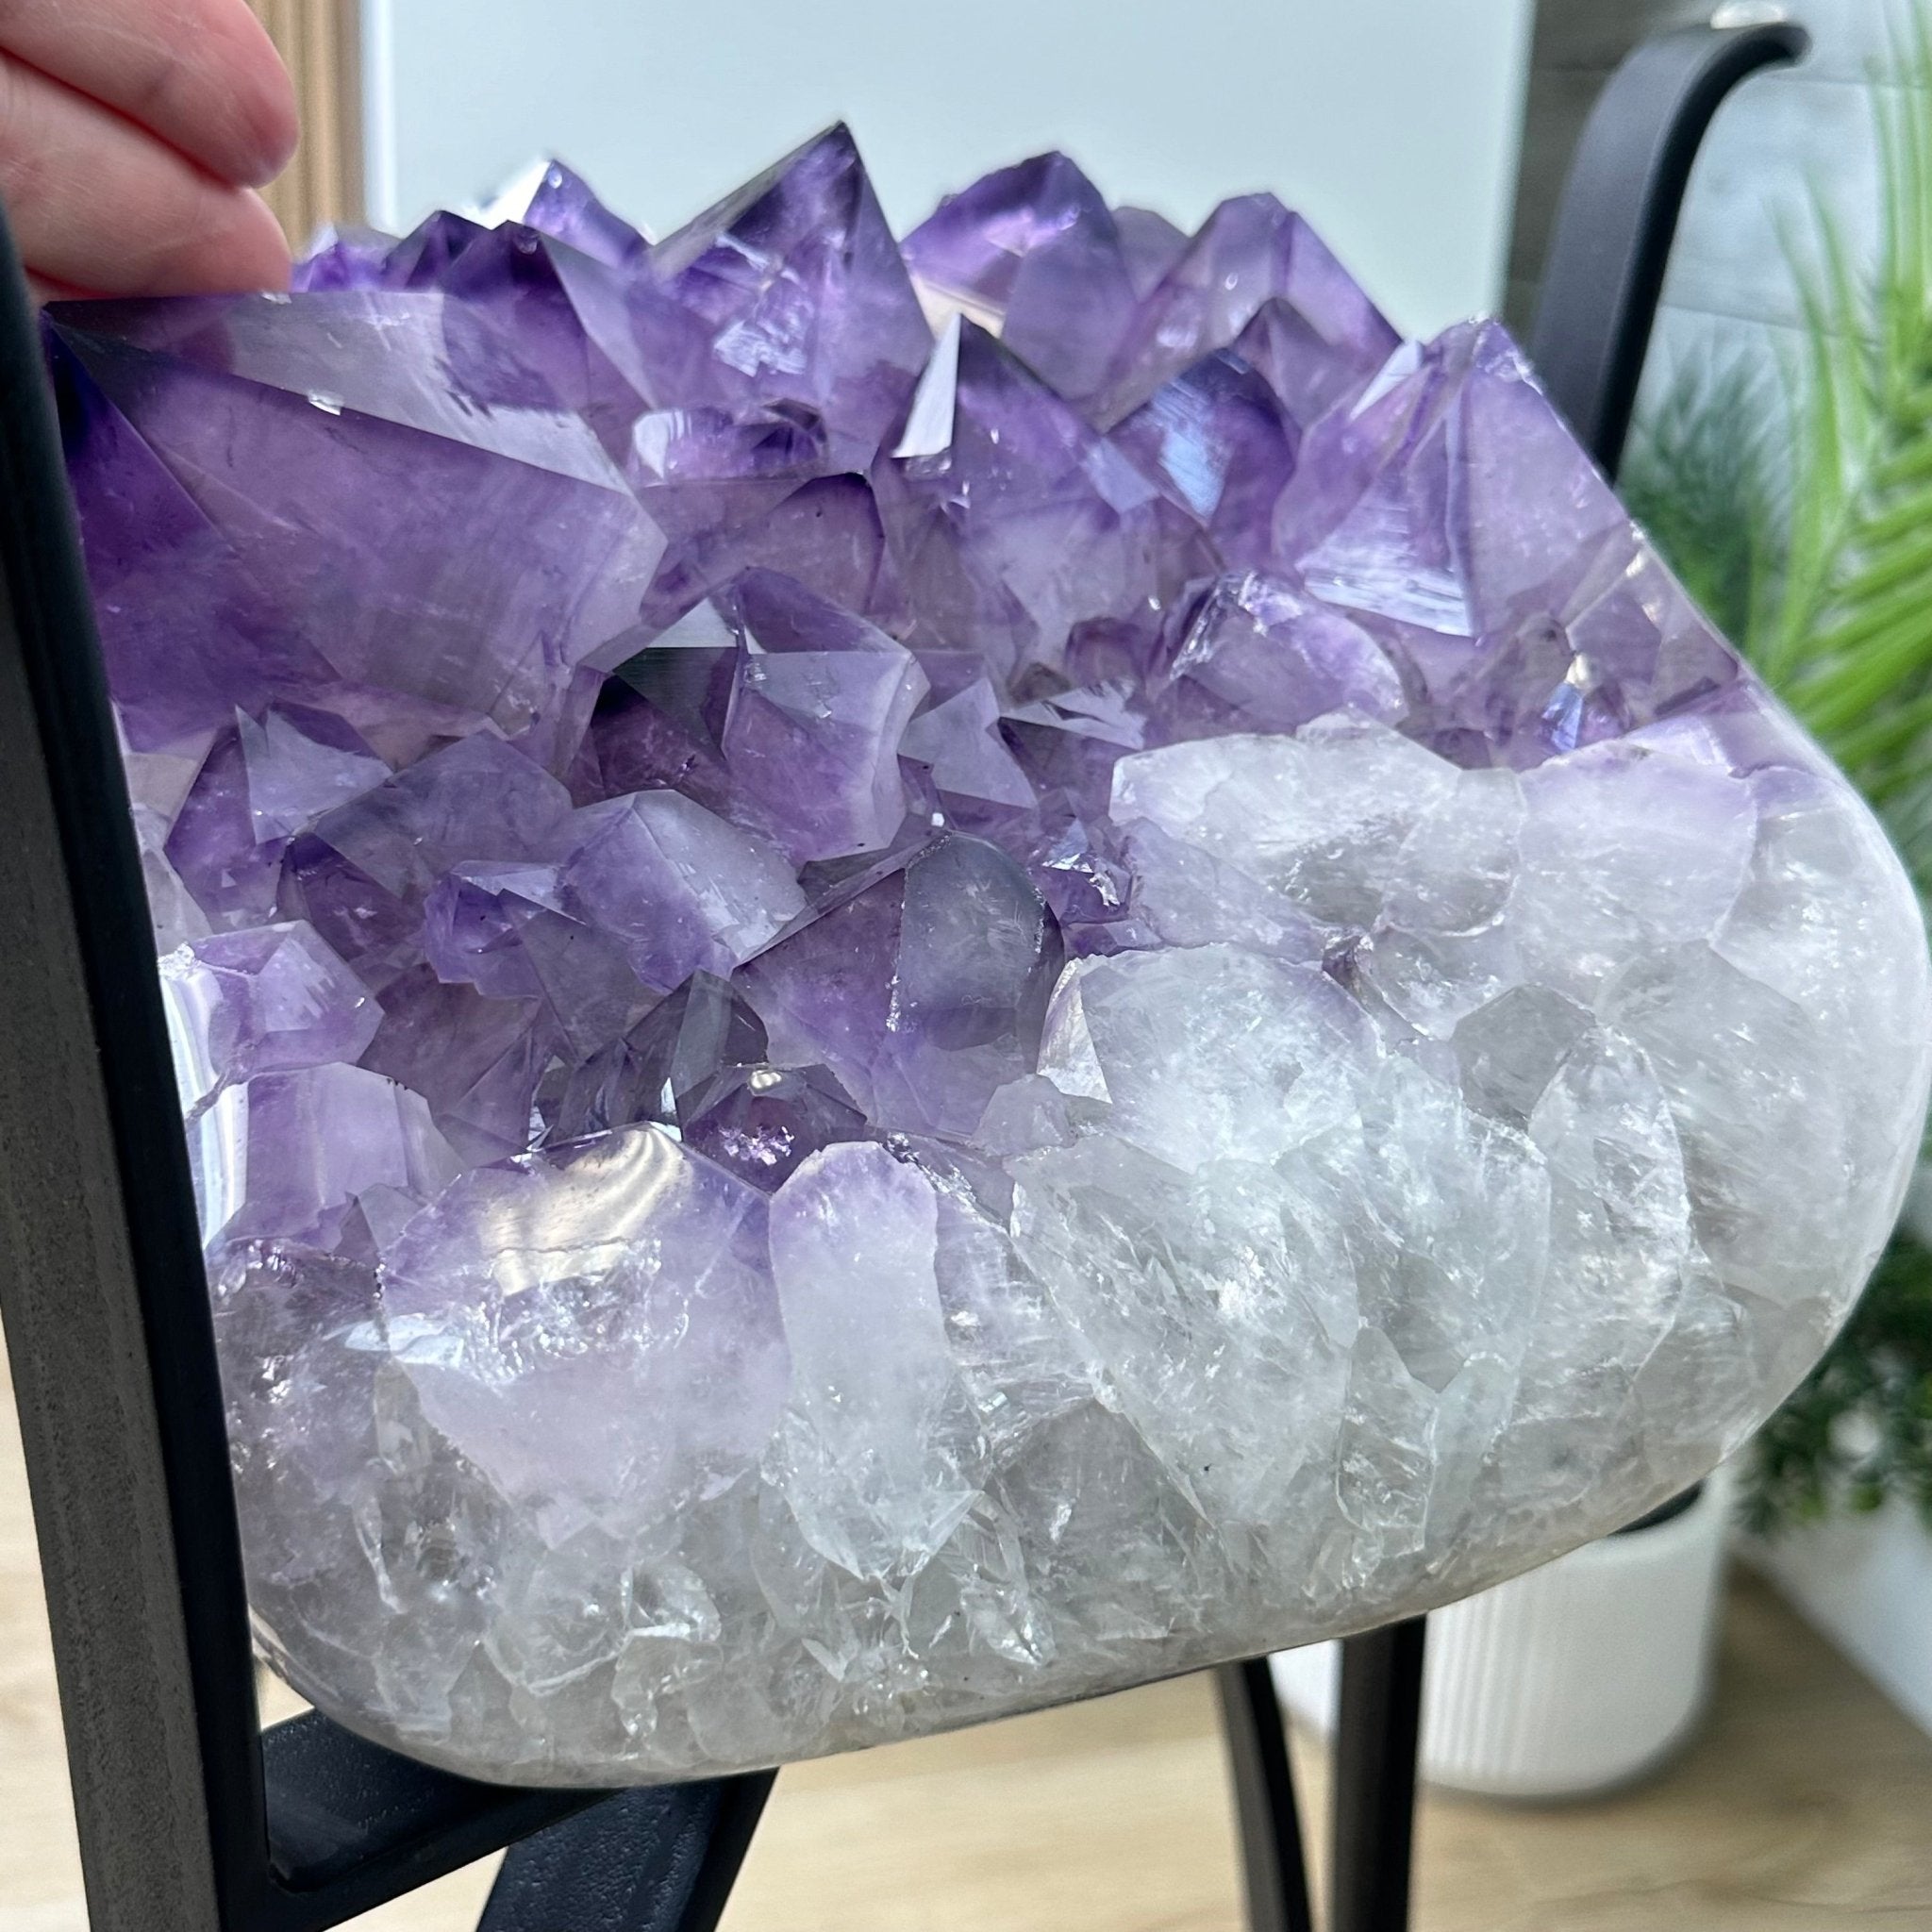 Super Quality Amethyst Geode Side Table, 46.2 lbs, 21.7" Tall #1384-0037 - Brazil GemsBrazil GemsSuper Quality Amethyst Geode Side Table, 46.2 lbs, 21.7" Tall #1384-0037Tables: Side1384-0037